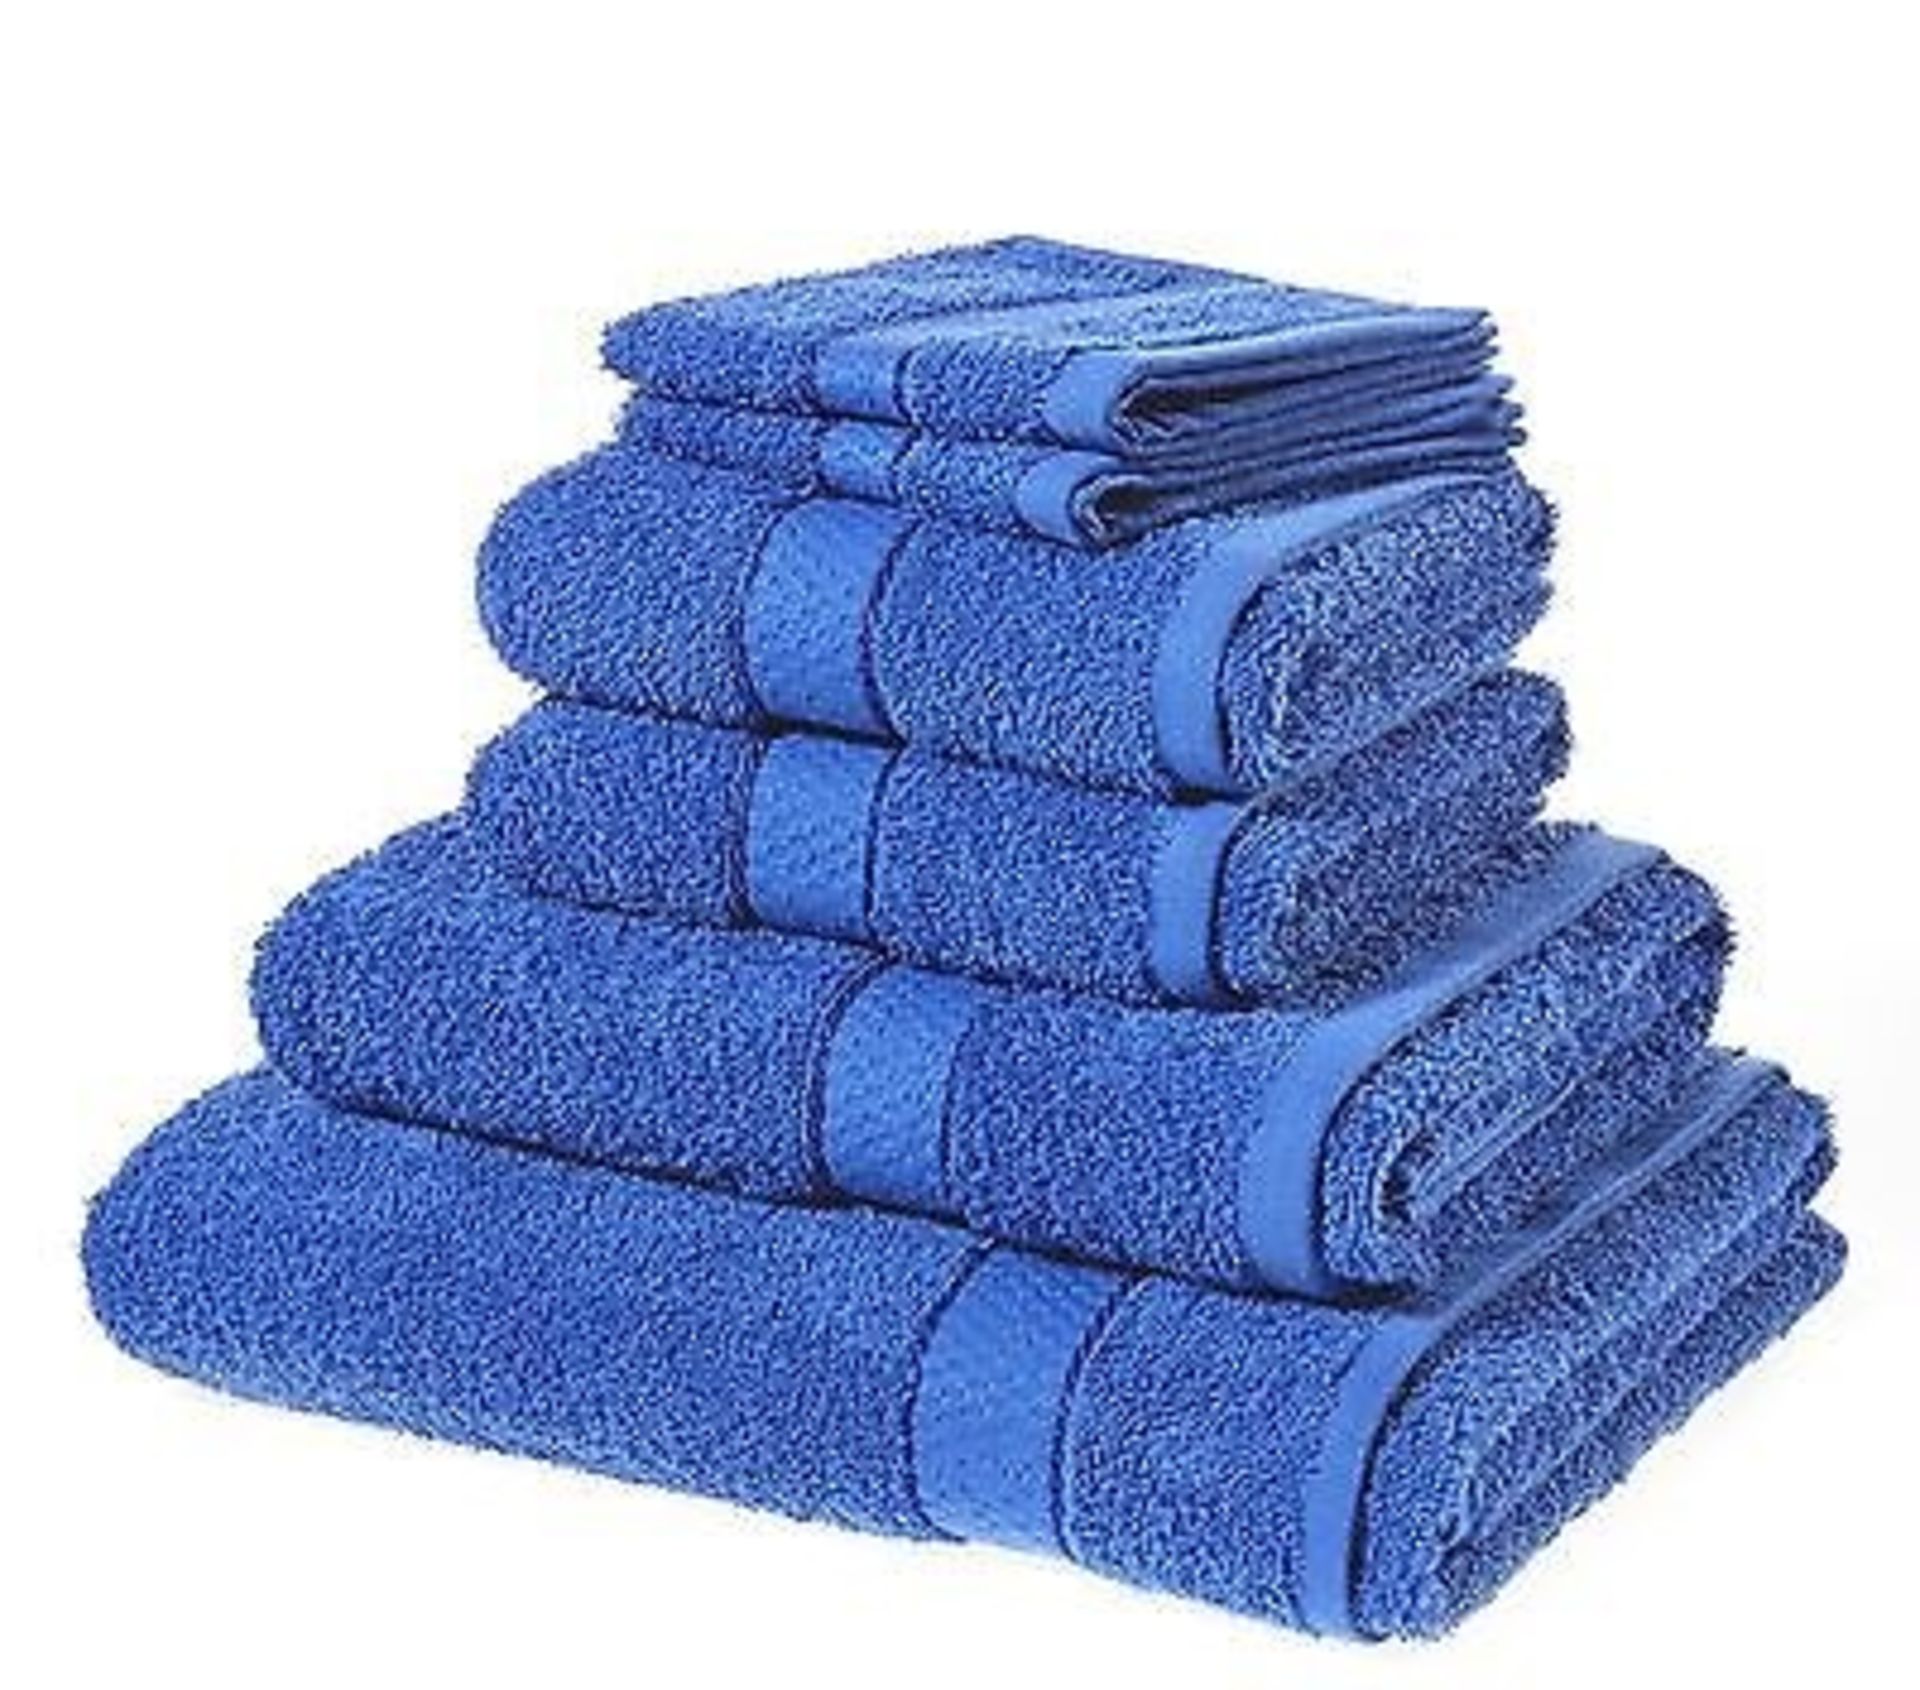 V *TRADE QTY* Brand New Royal Blue 6 Piece Towel Bale Set With 2 Face Towels - 2 Hand Towels - 1